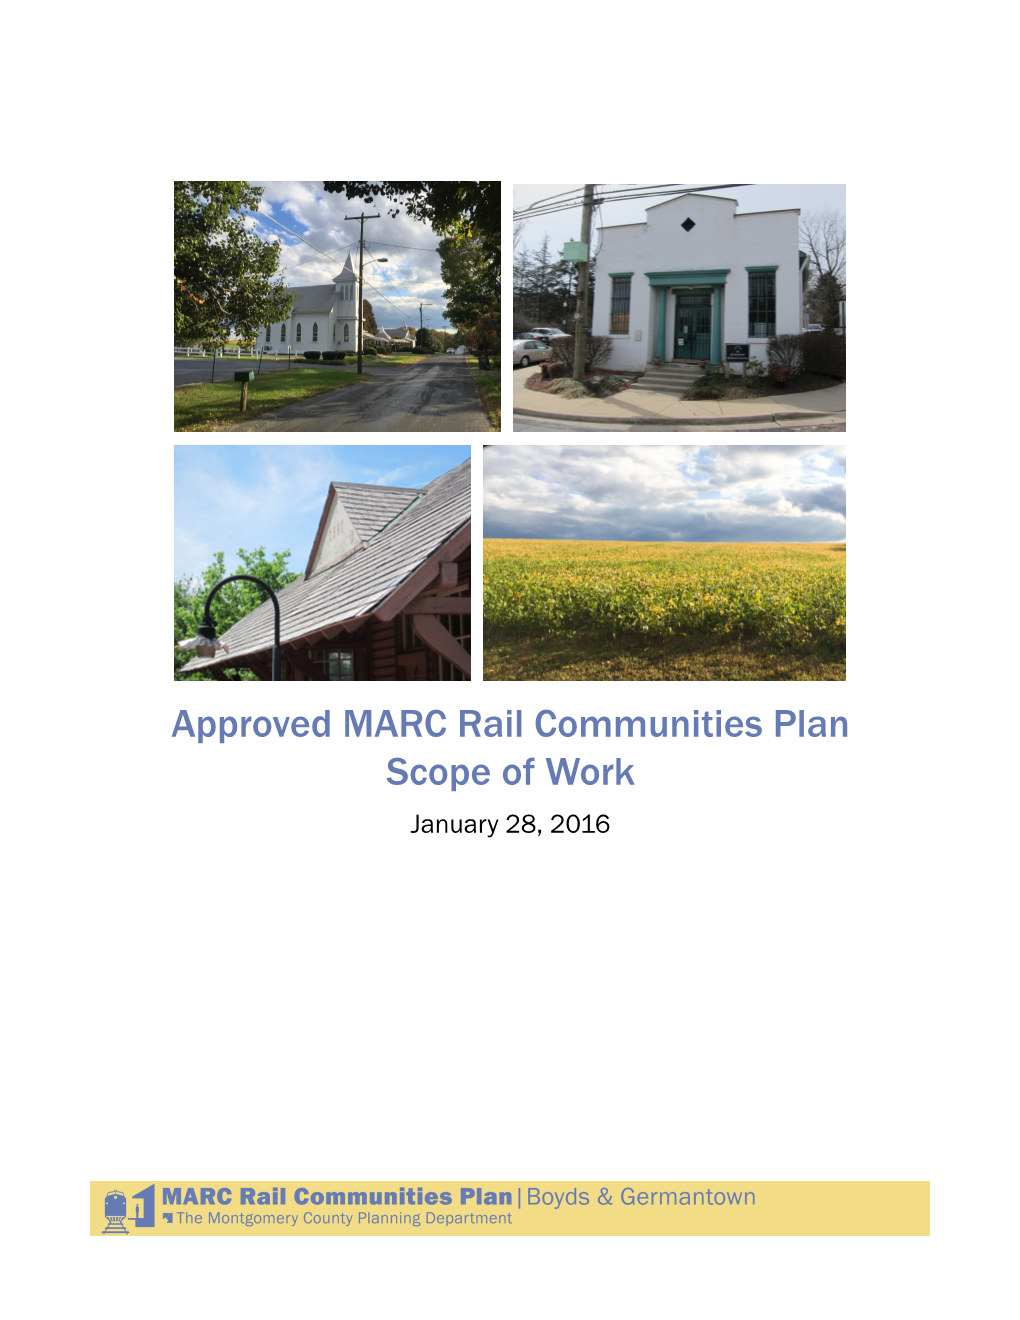 Approved MARC Rail Communities Plan Scope of Work January 28, 2016 CONTENTS